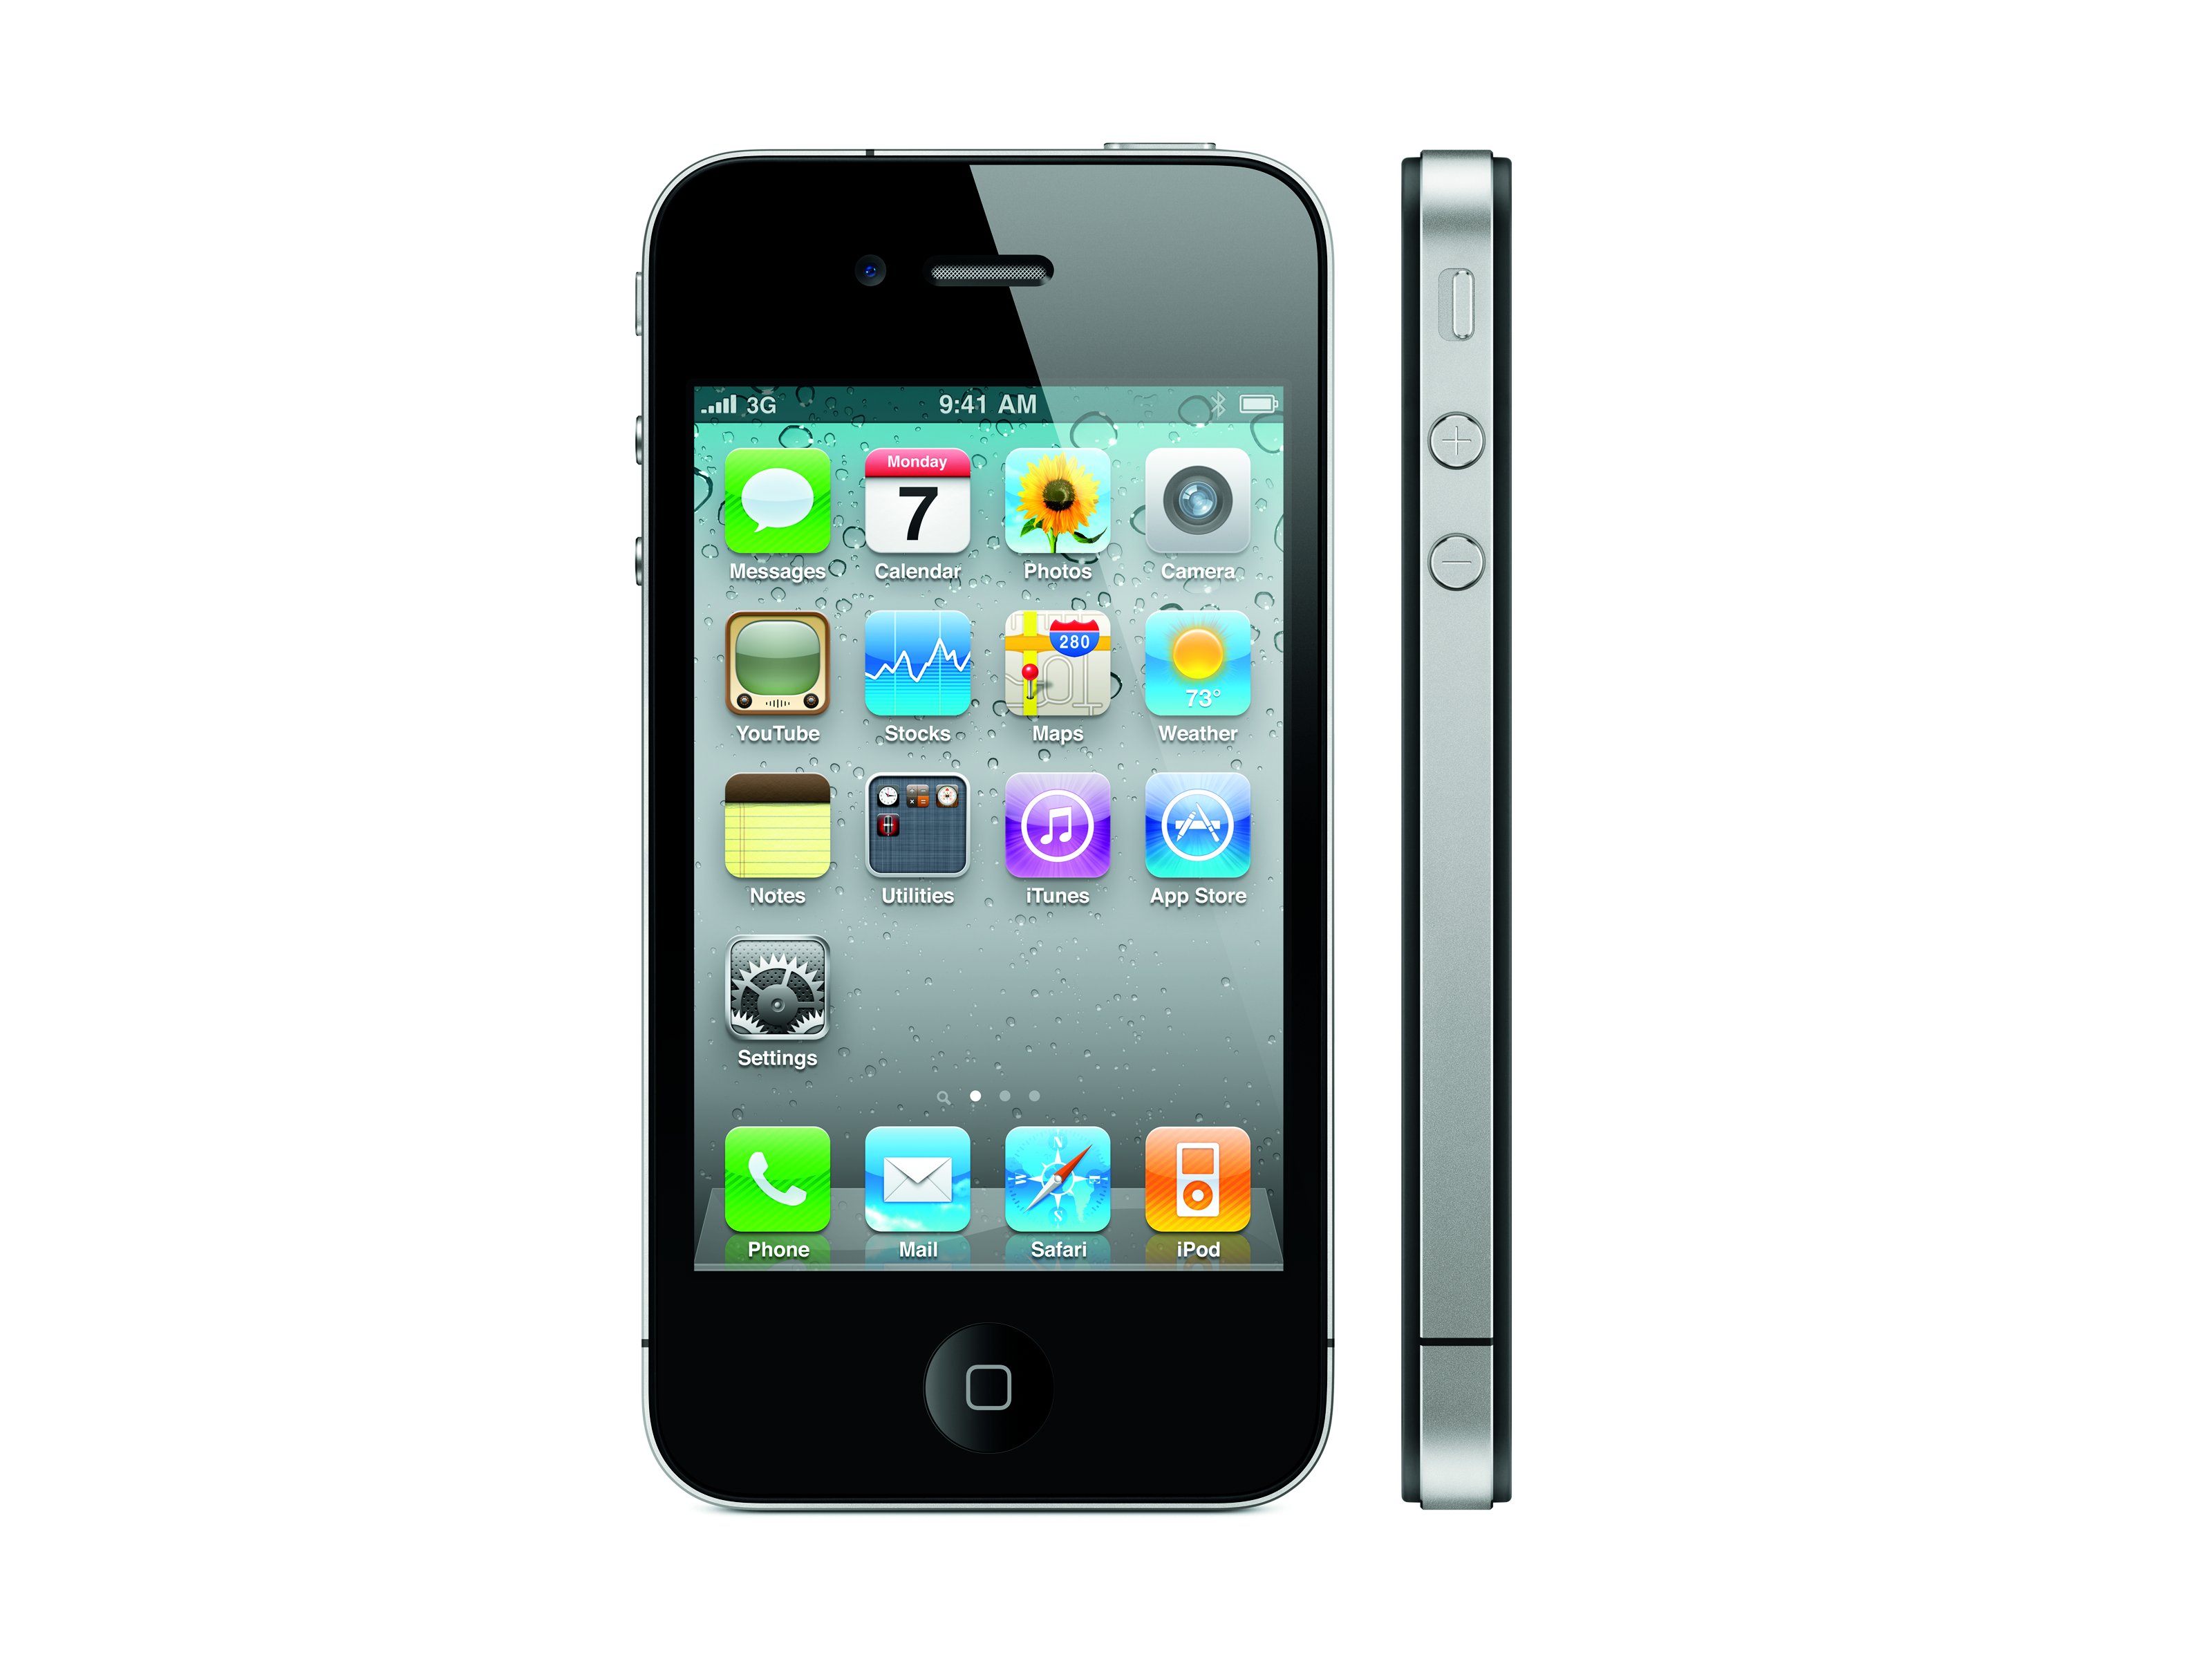 How to Fix iPhone 4 in Recovery Mode? 11